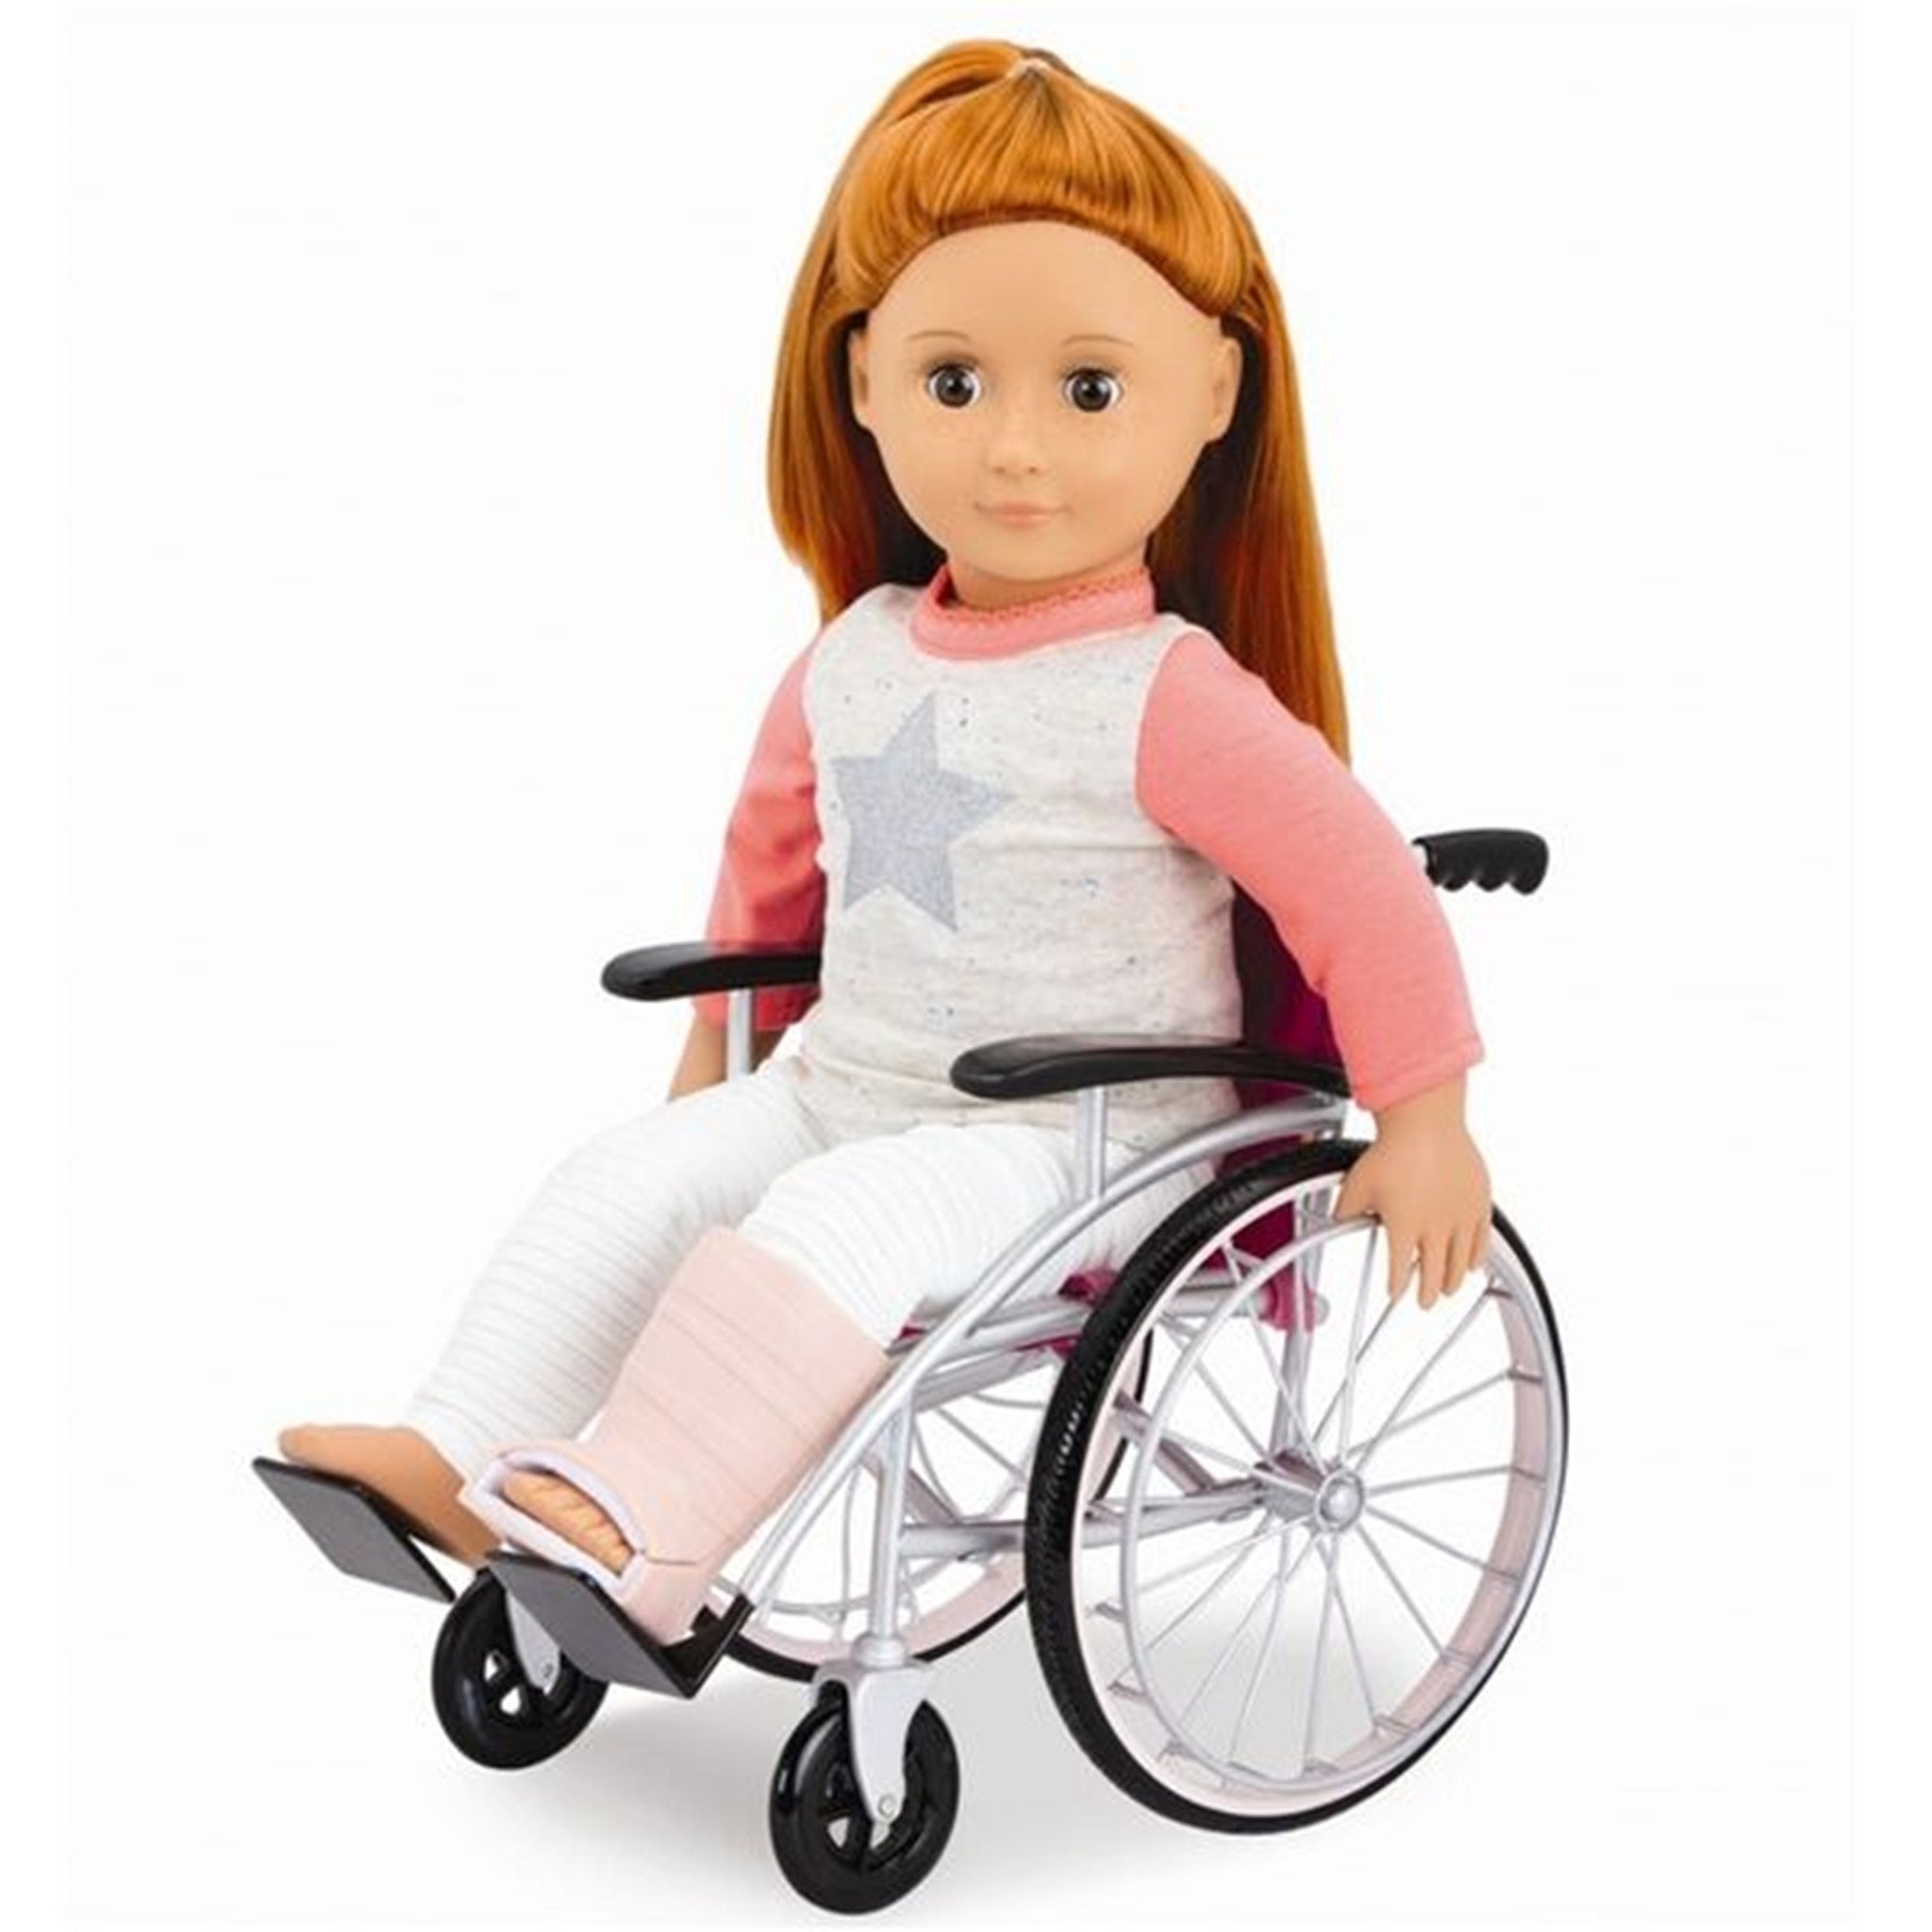 Our Generation Doll Accessories - Hospital Set 2